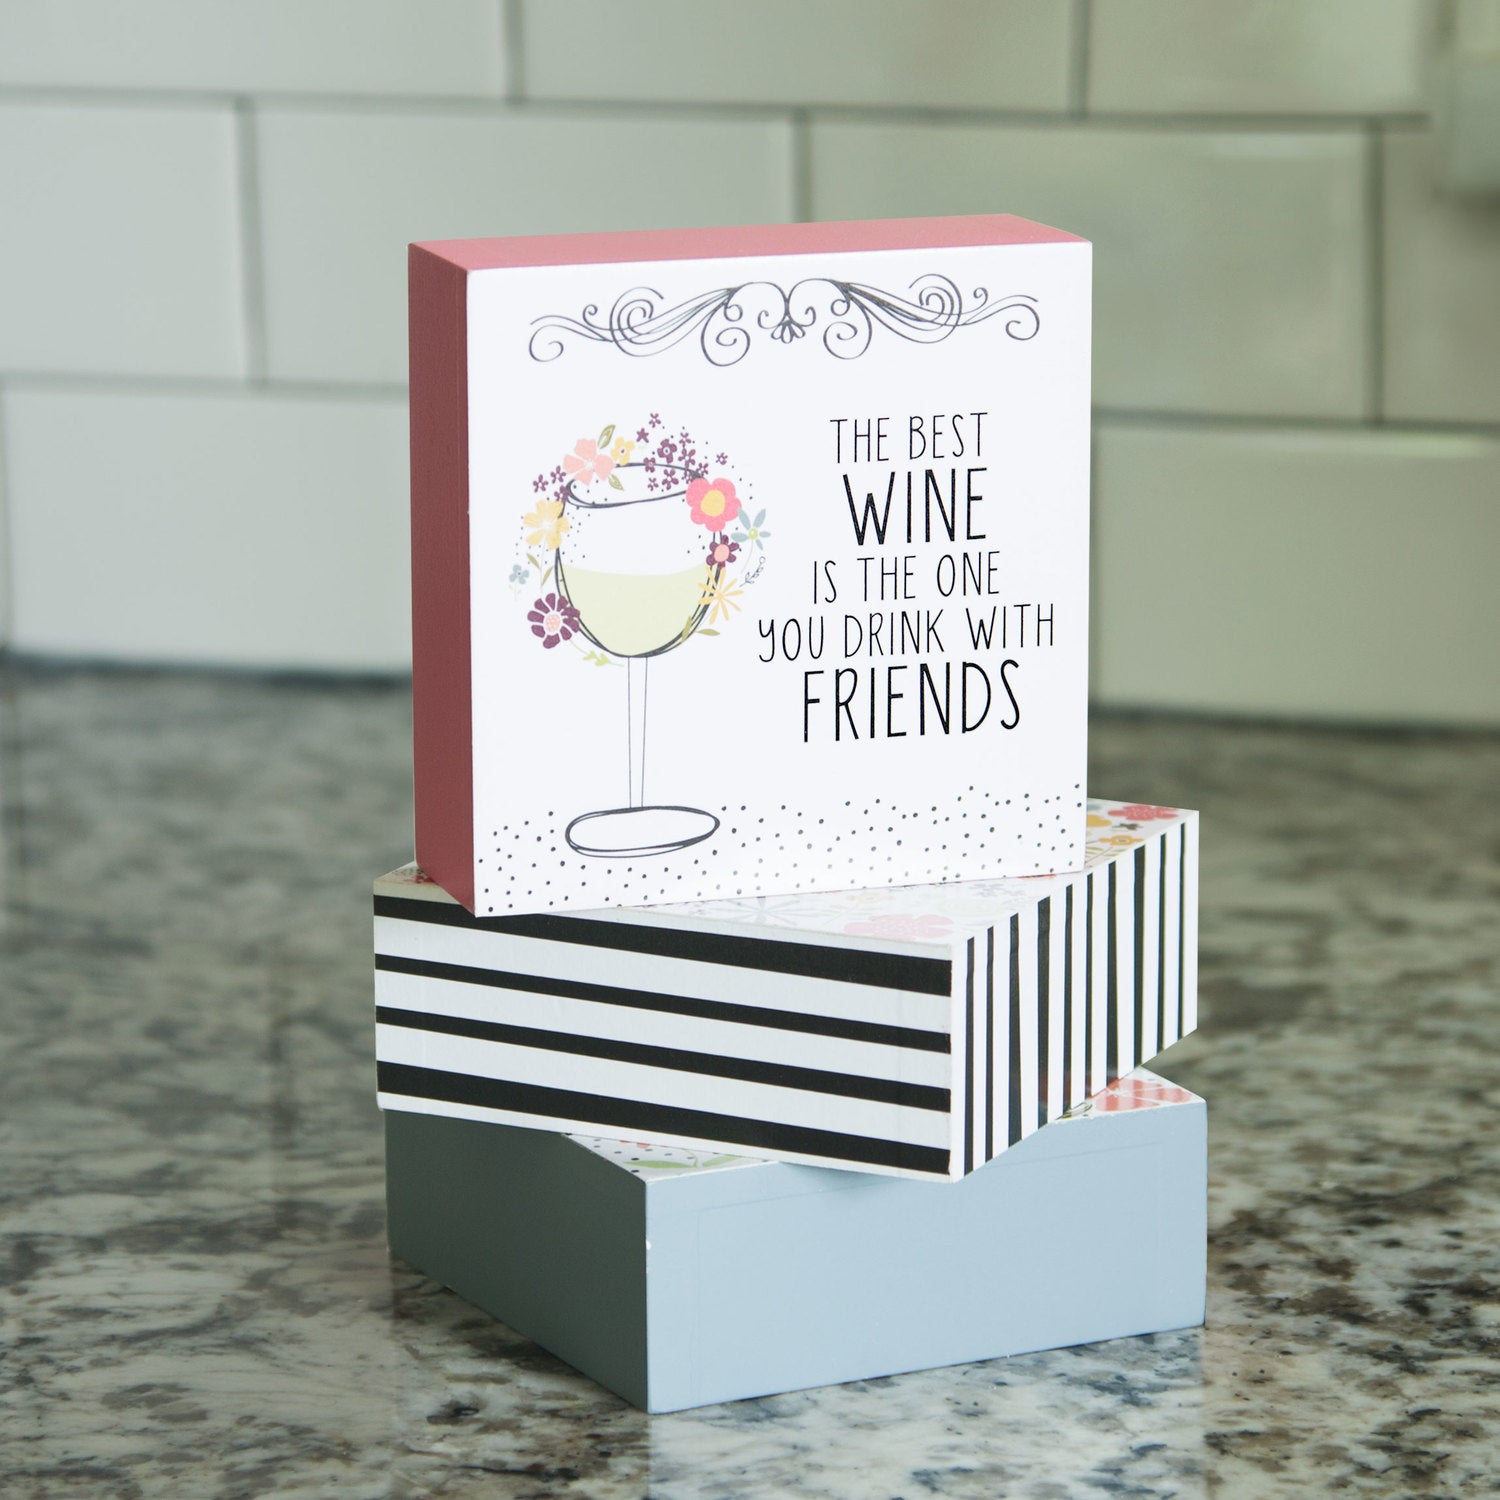 The best wine is the one you drink with friends Plaque Self-standing plaque - Beloved Gift Shop